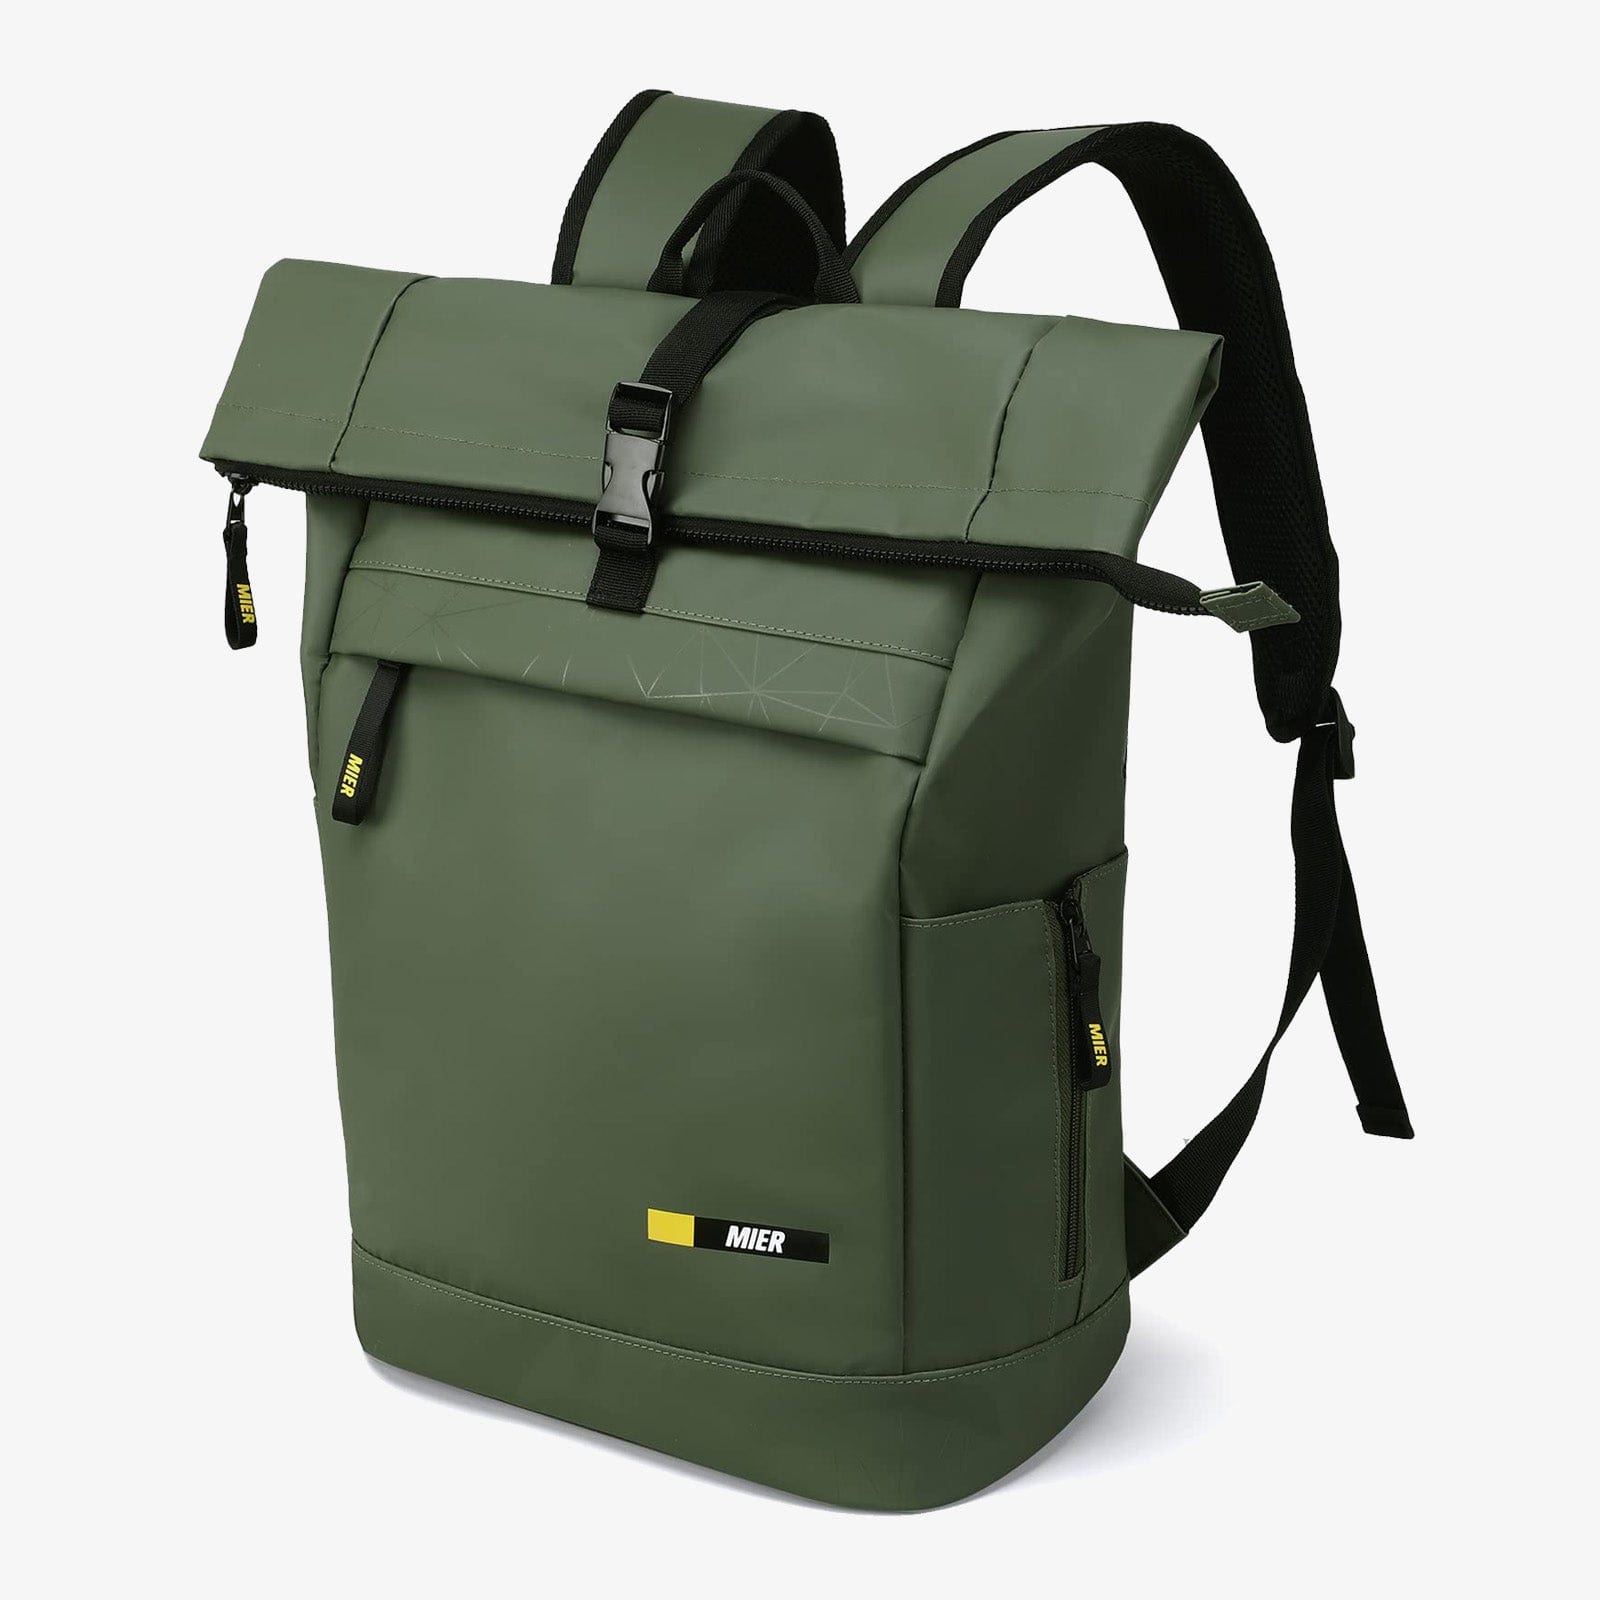 Roll-top Travel Backpack with Laptop Compartment - Green